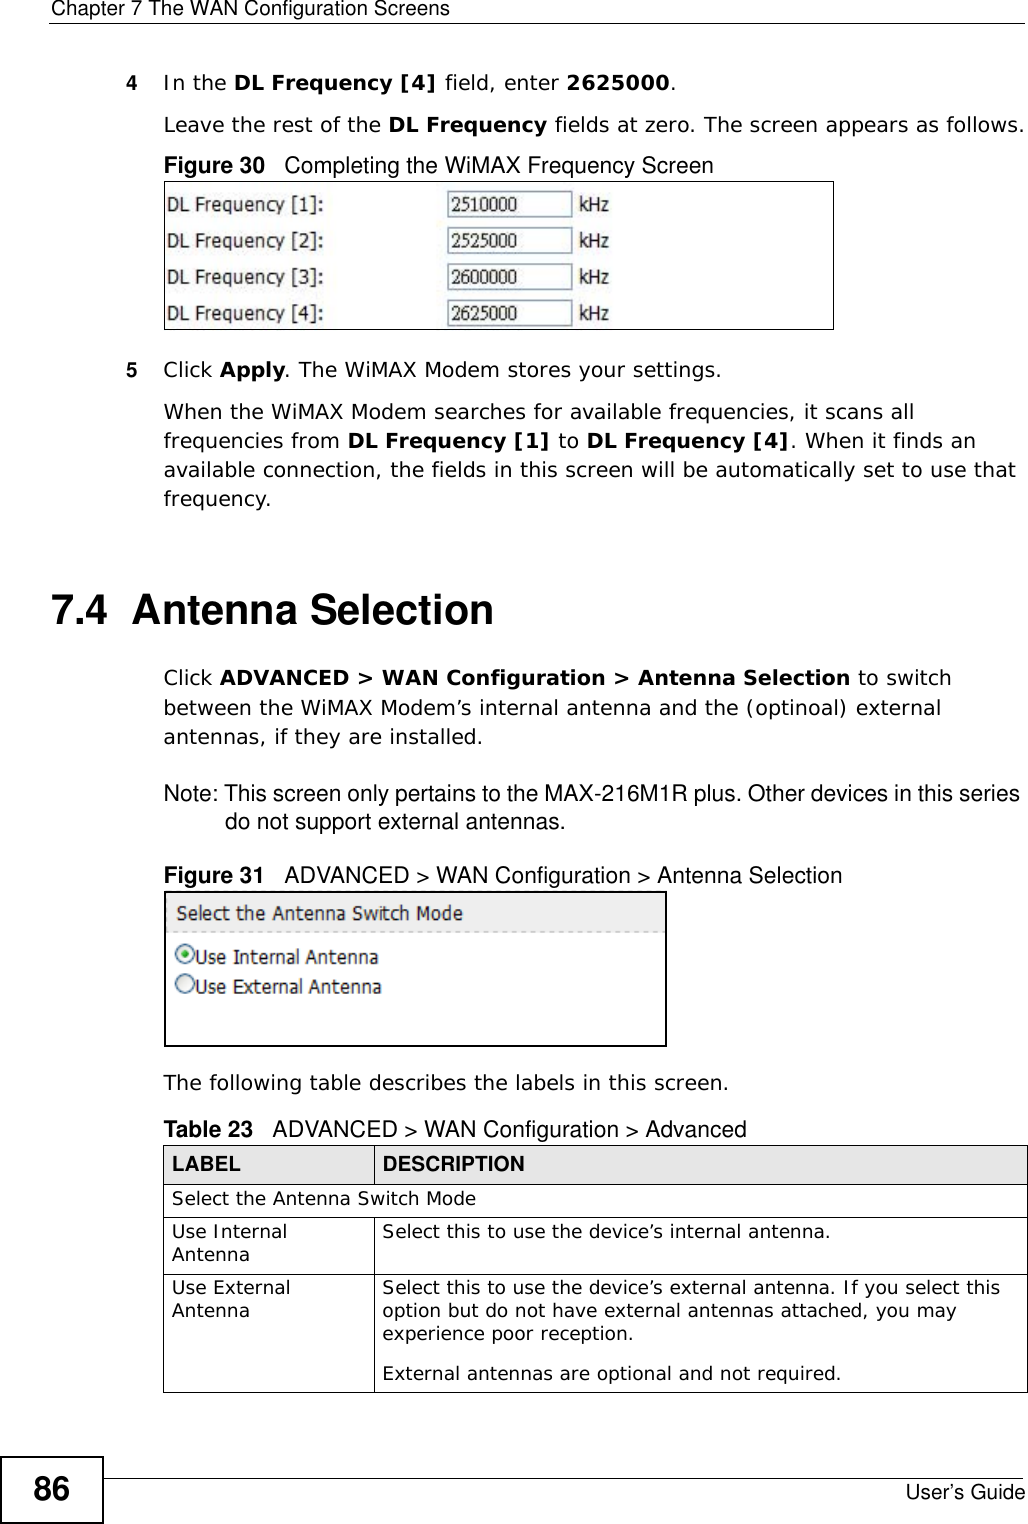 Chapter 7 The WAN Configuration ScreensUser’s Guide864In the DL Frequency [4] field, enter 2625000.Leave the rest of the DL Frequency fields at zero. The screen appears as follows.Figure 30   Completing the WiMAX Frequency Screen5Click Apply. The WiMAX Modem stores your settings. When the WiMAX Modem searches for available frequencies, it scans all frequencies from DL Frequency [1] to DL Frequency [4]. When it finds an available connection, the fields in this screen will be automatically set to use that frequency.7.4  Antenna SelectionClick ADVANCED &gt; WAN Configuration &gt; Antenna Selection to switch between the WiMAX Modem’s internal antenna and the (optinoal) external antennas, if they are installed.Note: This screen only pertains to the MAX-216M1R plus. Other devices in this series do not support external antennas.Figure 31   ADVANCED &gt; WAN Configuration &gt; Antenna SelectionThe following table describes the labels in this screen.Table 23   ADVANCED &gt; WAN Configuration &gt; AdvancedLABEL DESCRIPTIONSelect the Antenna Switch ModeUse Internal Antenna Select this to use the device’s internal antenna.Use External Antenna Select this to use the device’s external antenna. If you select this option but do not have external antennas attached, you may experience poor reception.External antennas are optional and not required.